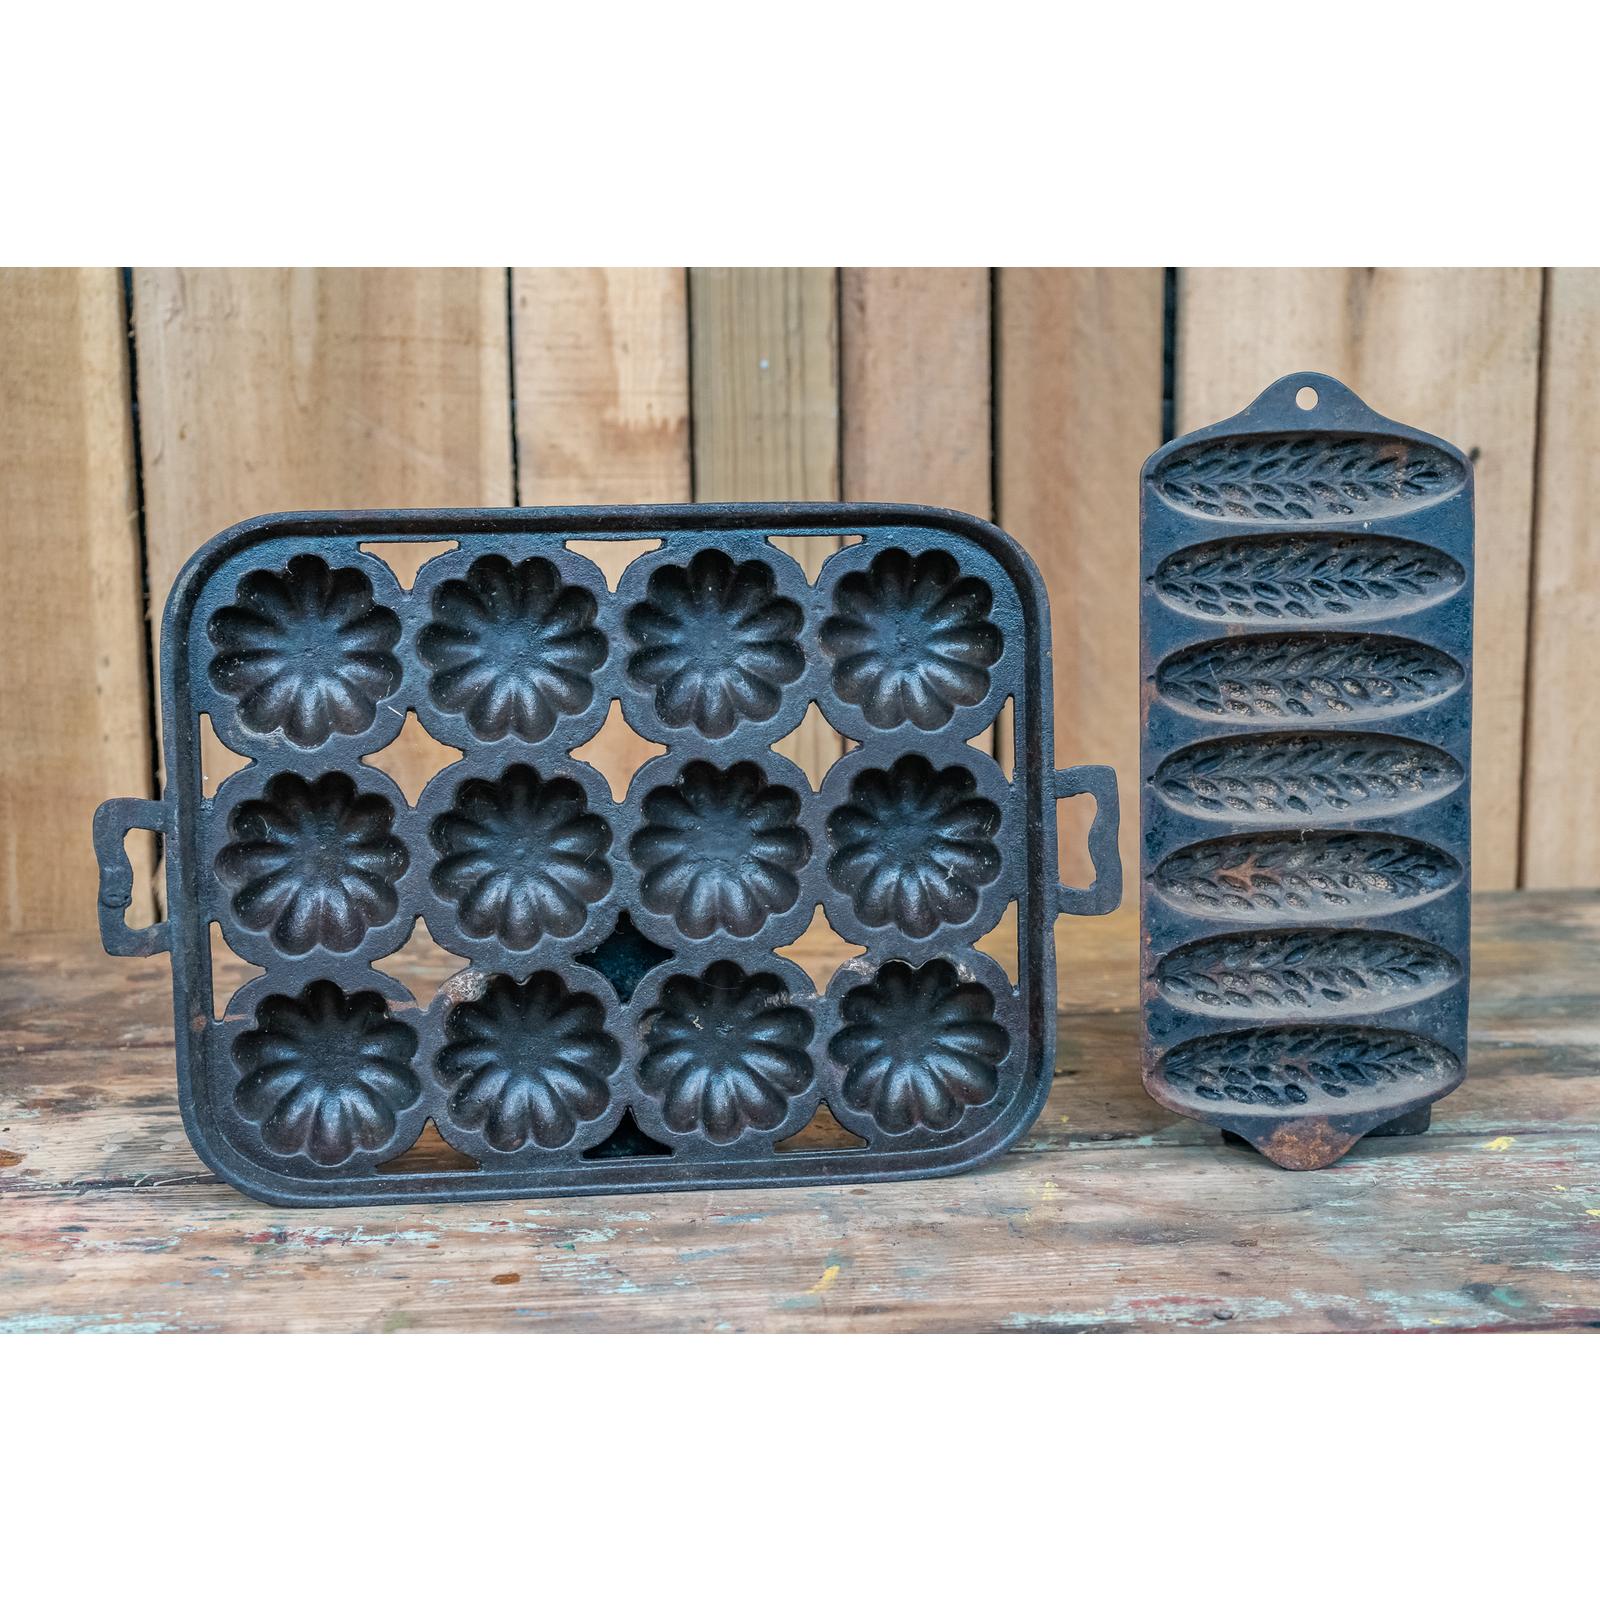 Old Mountain 10122 Cast Iron Muffin Pan - 6 Impression – The Total Integrity